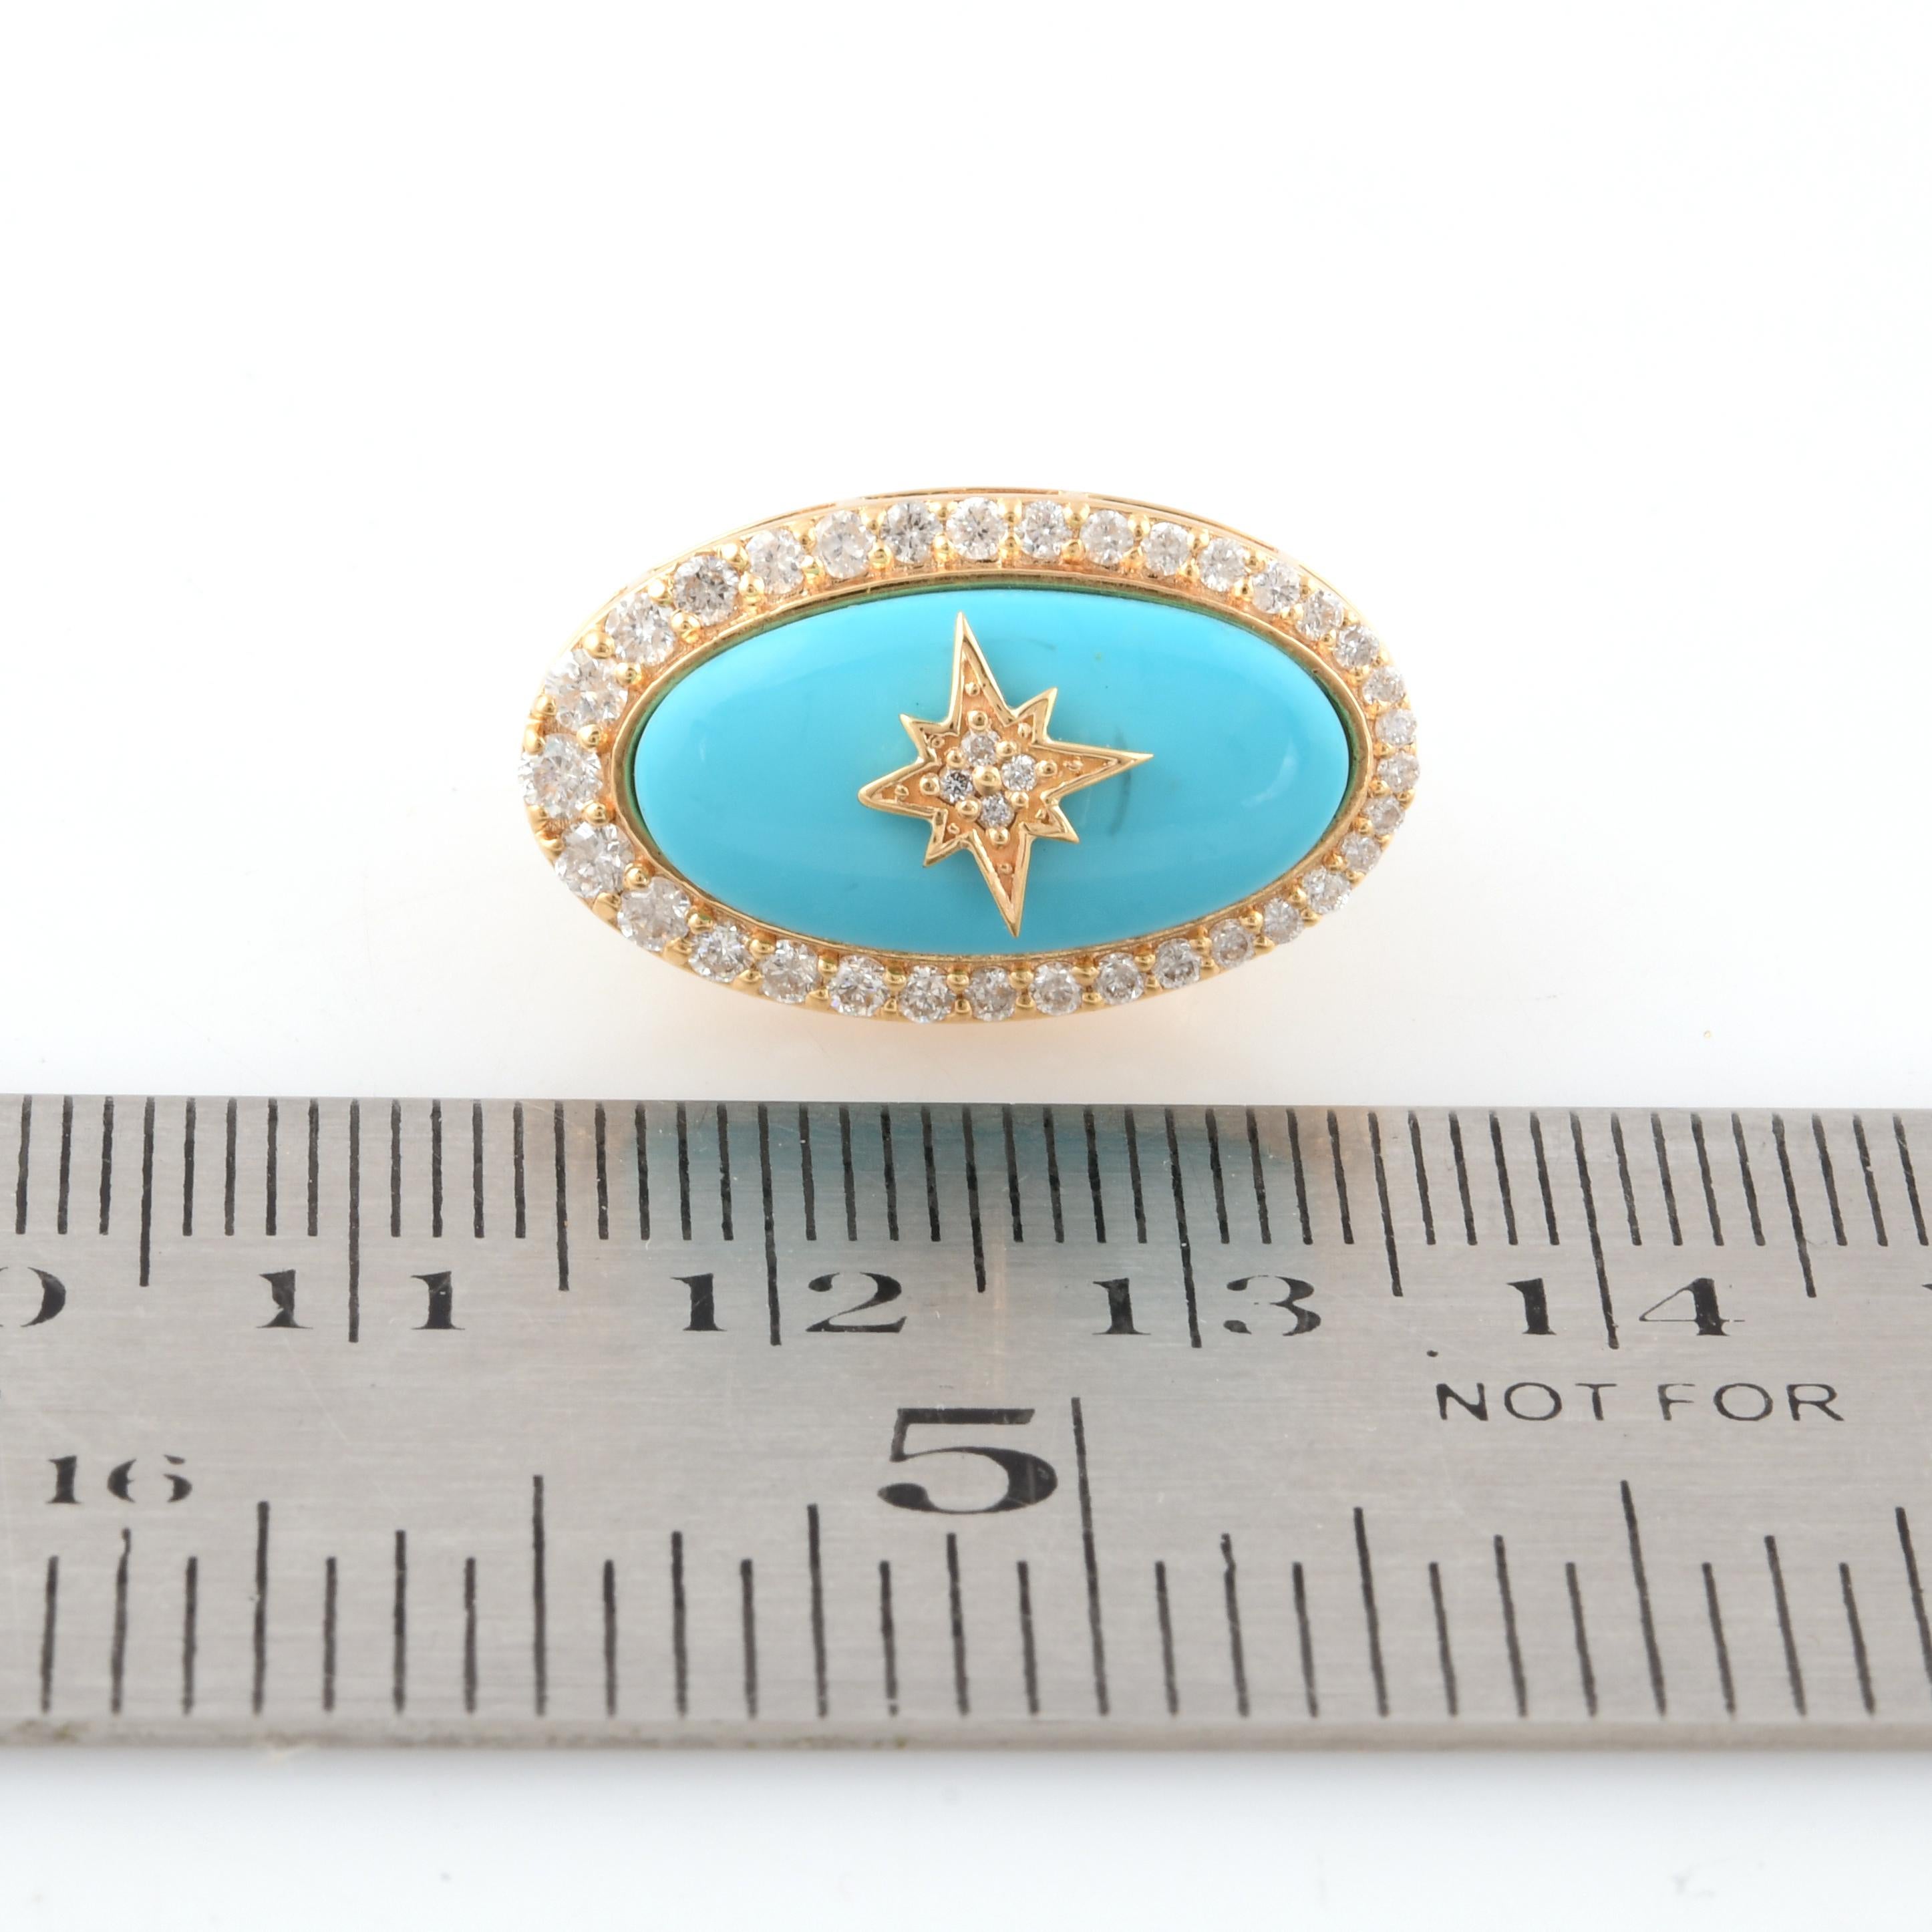 Natural Oval Turquoise Starburst Earrings Diamond 14 Karat Yellow Gold Jewelry For Sale 1